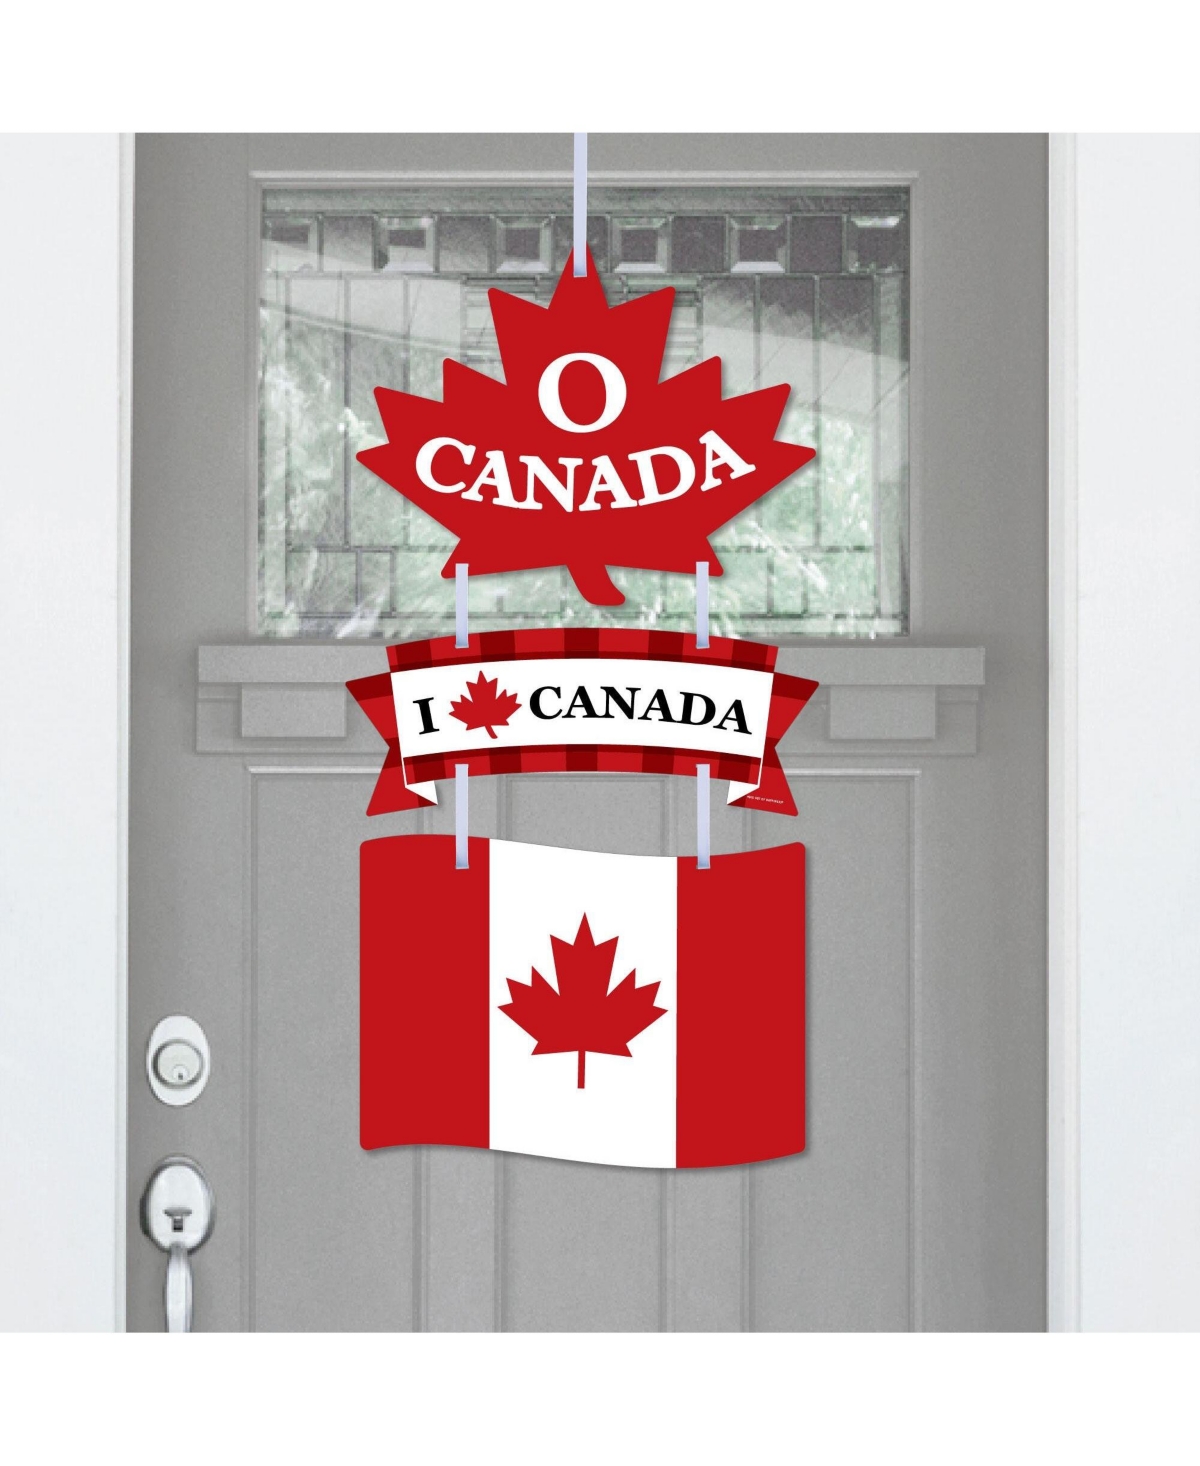 Canada Day - Hanging Porch Outdoor Decorations - Front Door Decor - 3 Piece Sign